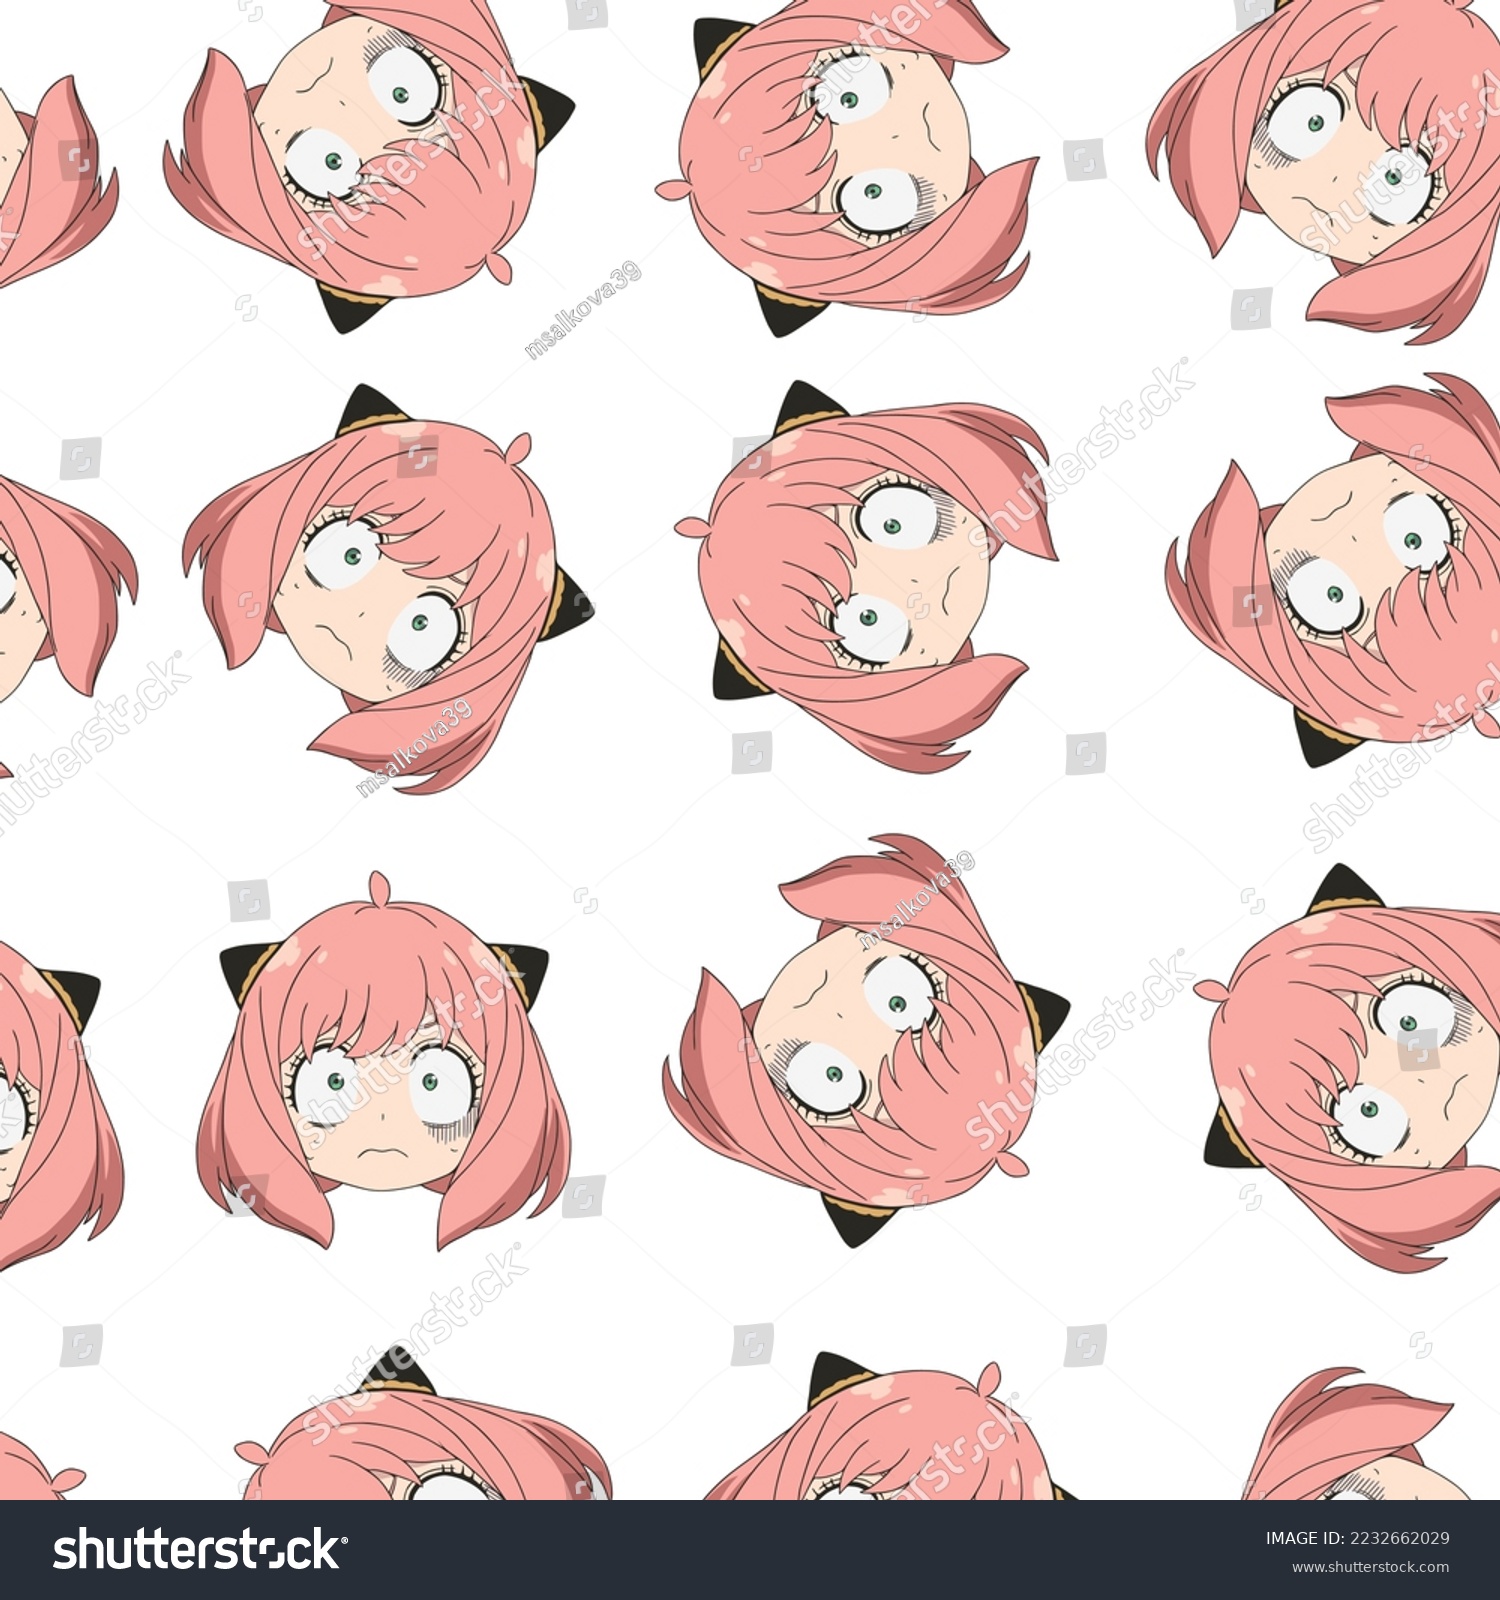 SVG of Frightened girl with wide open eyes, the girl has ears and lush pink hair, patern svg